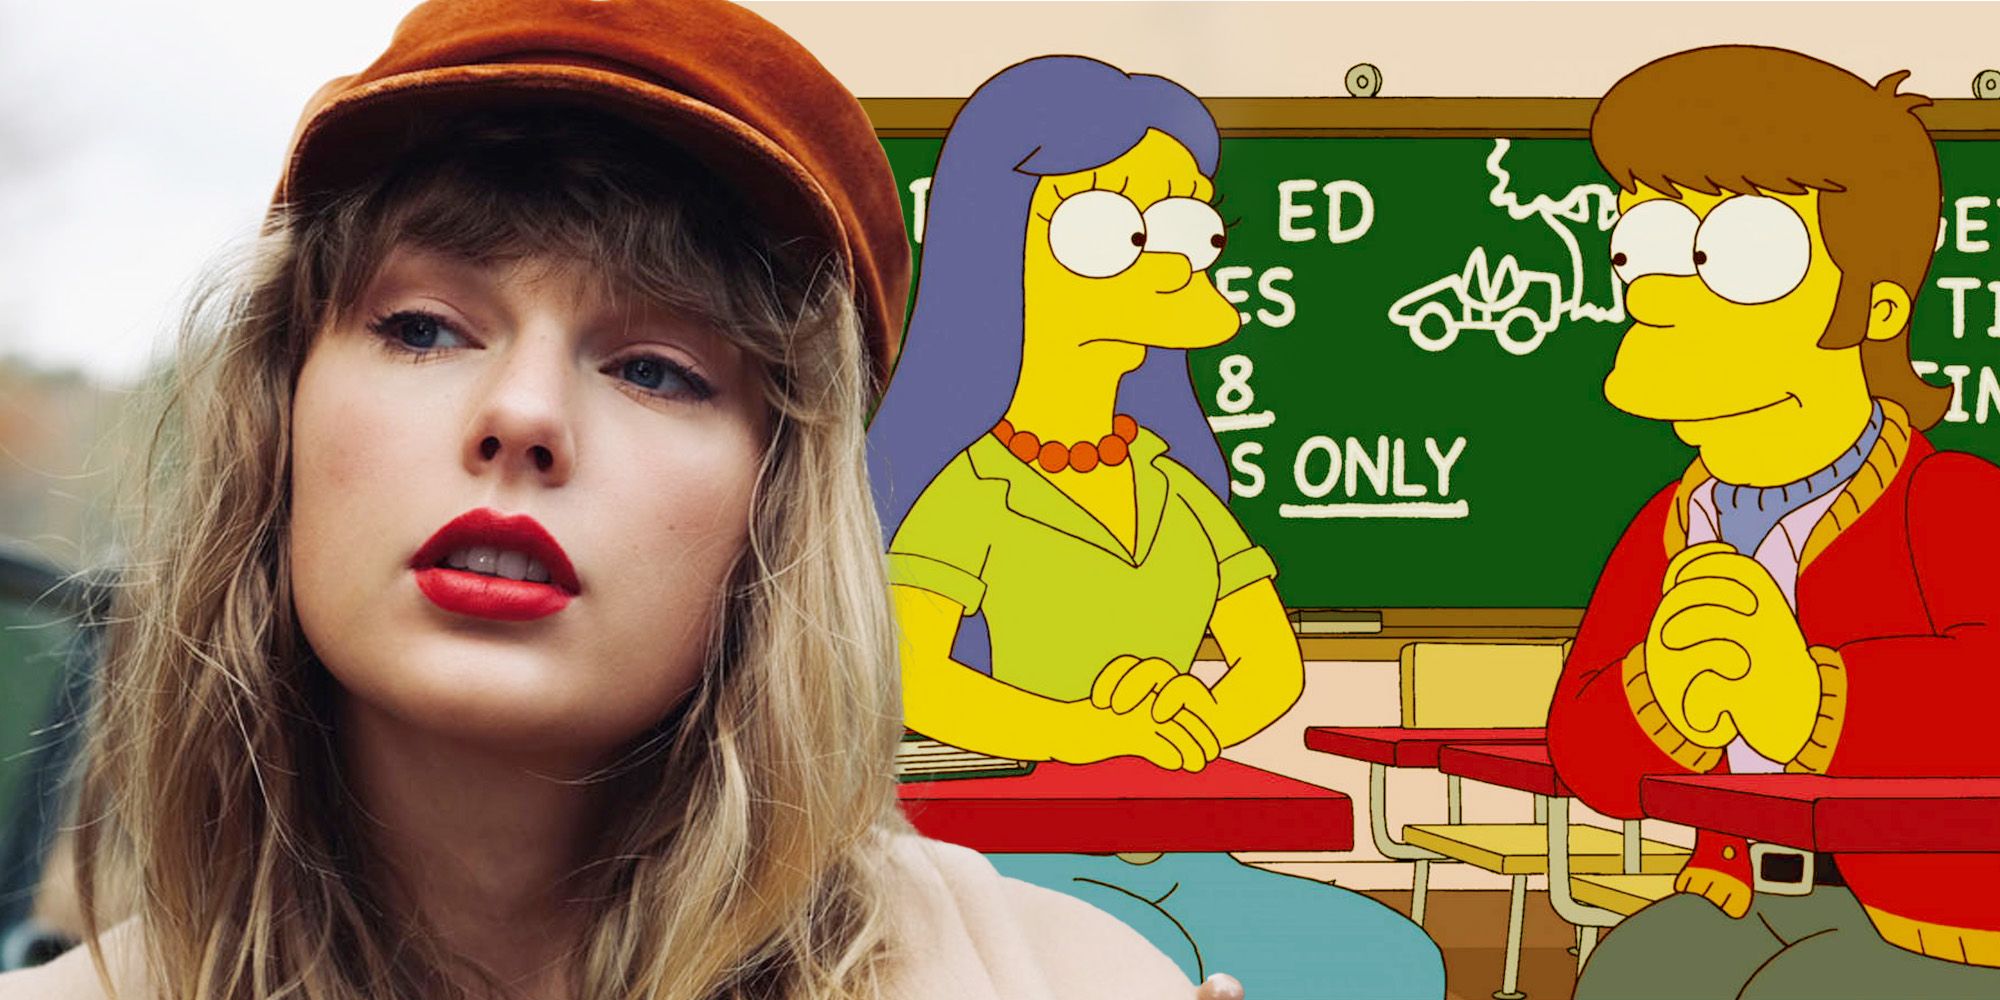 Composite image of Taylor Swift with young Marge and Homer from The Simpsons